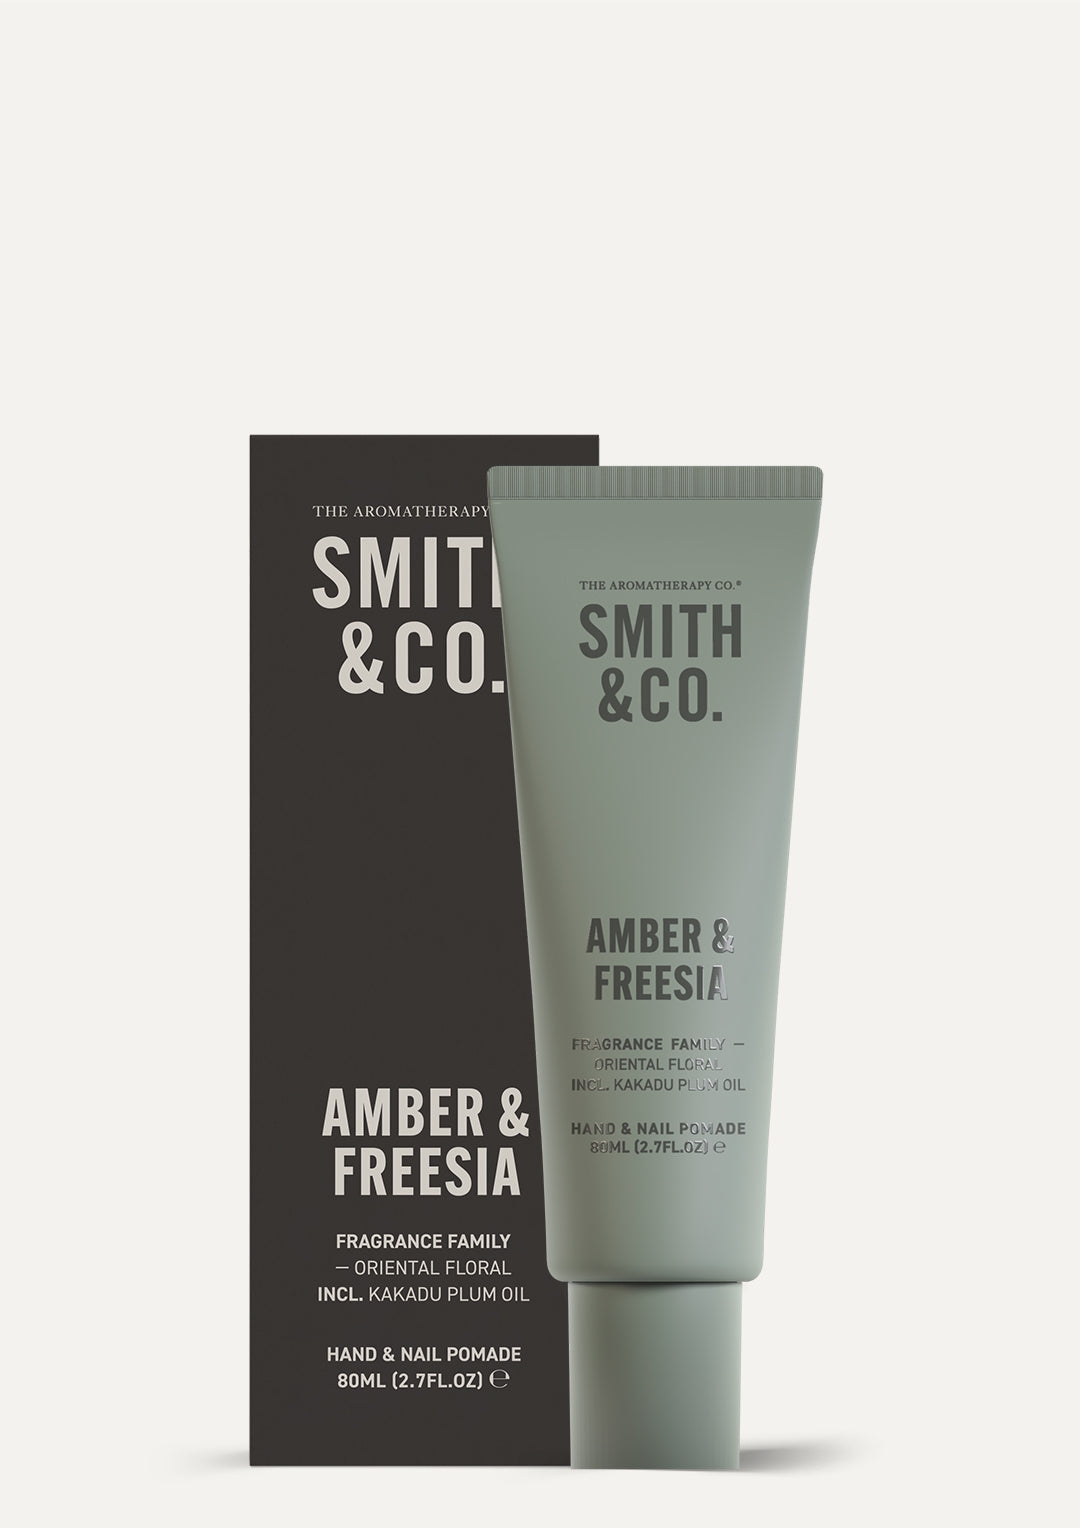 Smith & Co. Hand and Nail Pomade 80ml - Amber & Freesia